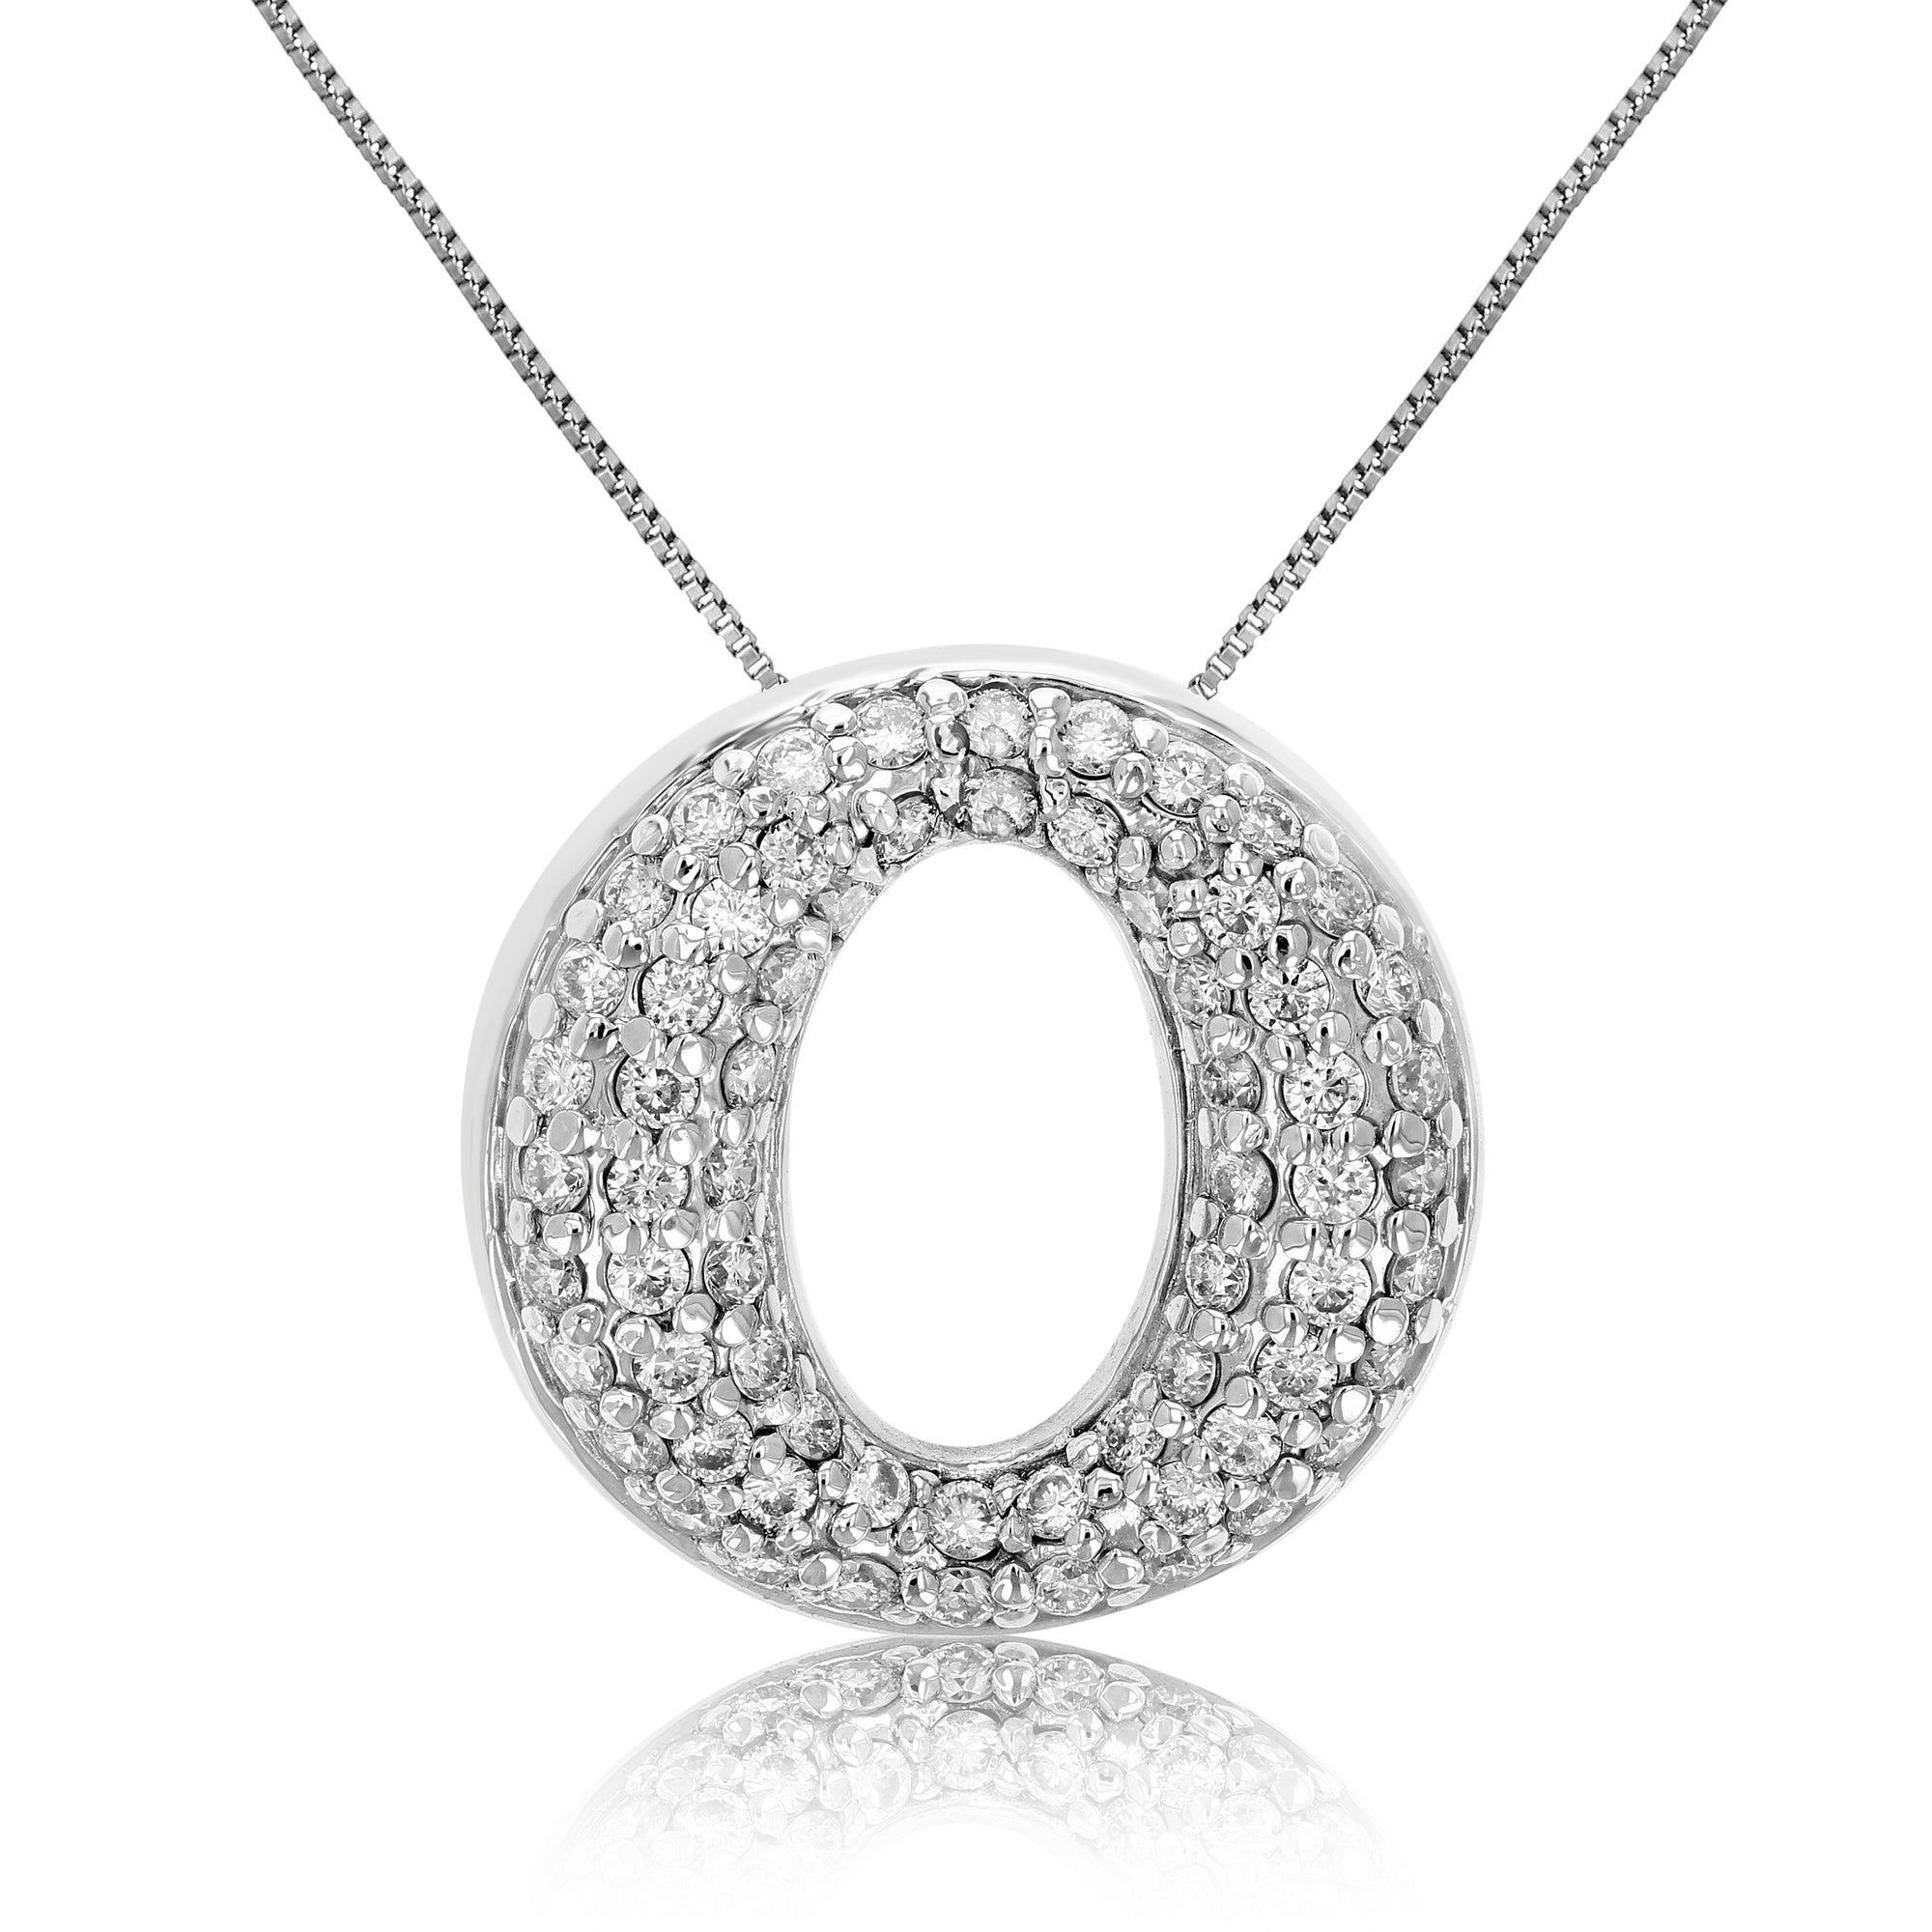 1 cttw Diamond Pendant, Diamond Circle Composite Pendant Necklace for Women in 14K White Gold with 18 Inch Chain, Prong Setting